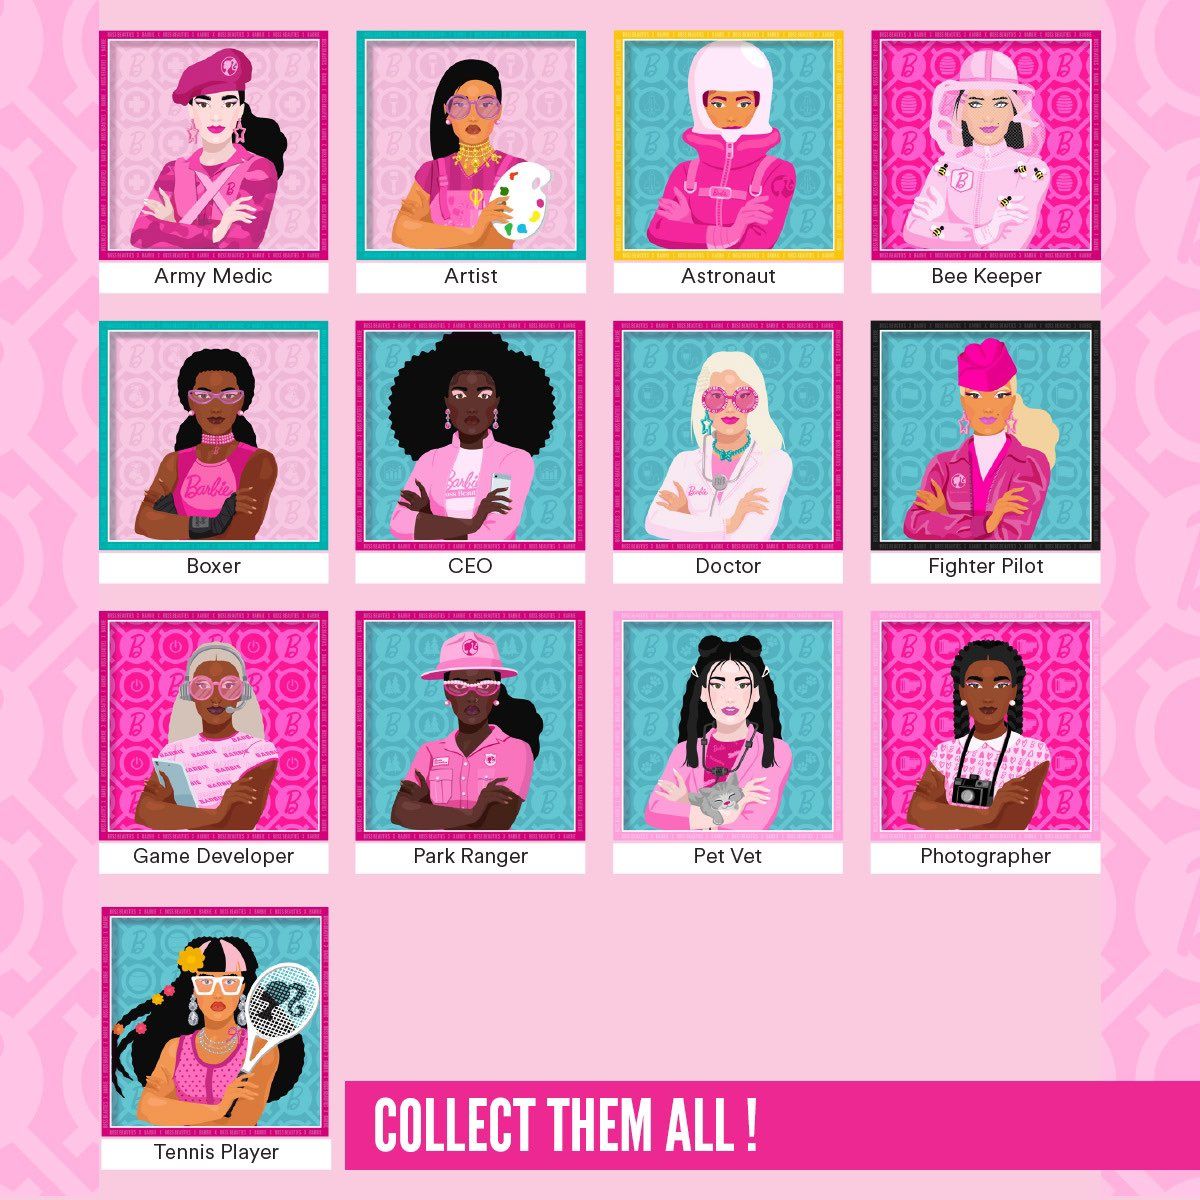 The collection includes Barbies of various professions. Source: https://twitter.com/BossBeauties